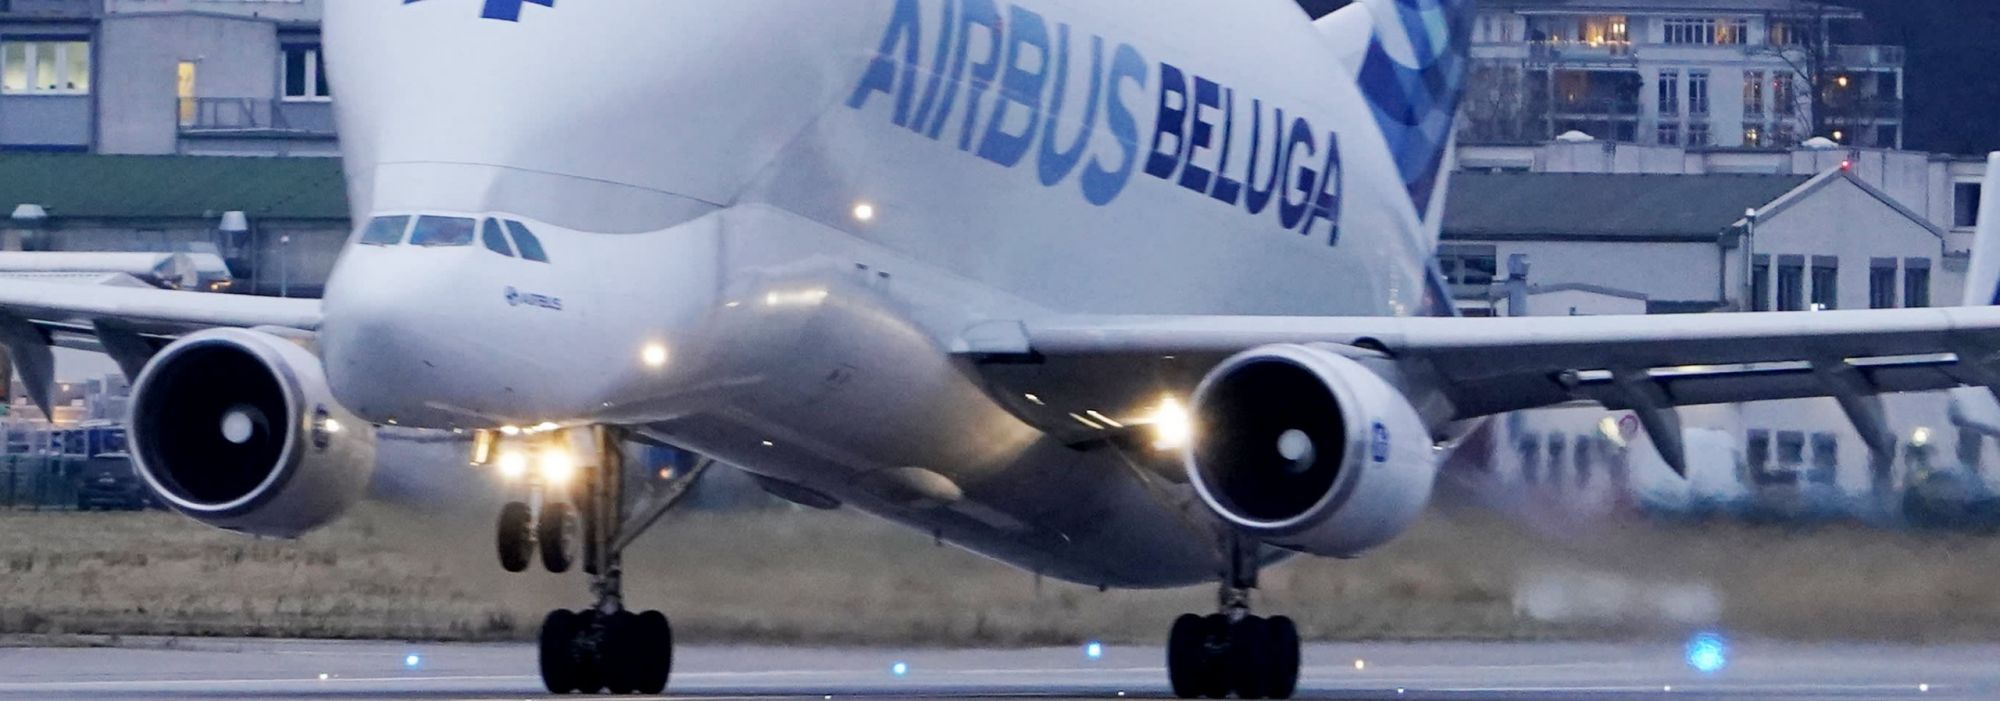 airbus-to-rent-out-its-giant-beluga-aircraft-in-bet-on-air-cargo-boom-scaled.jpg